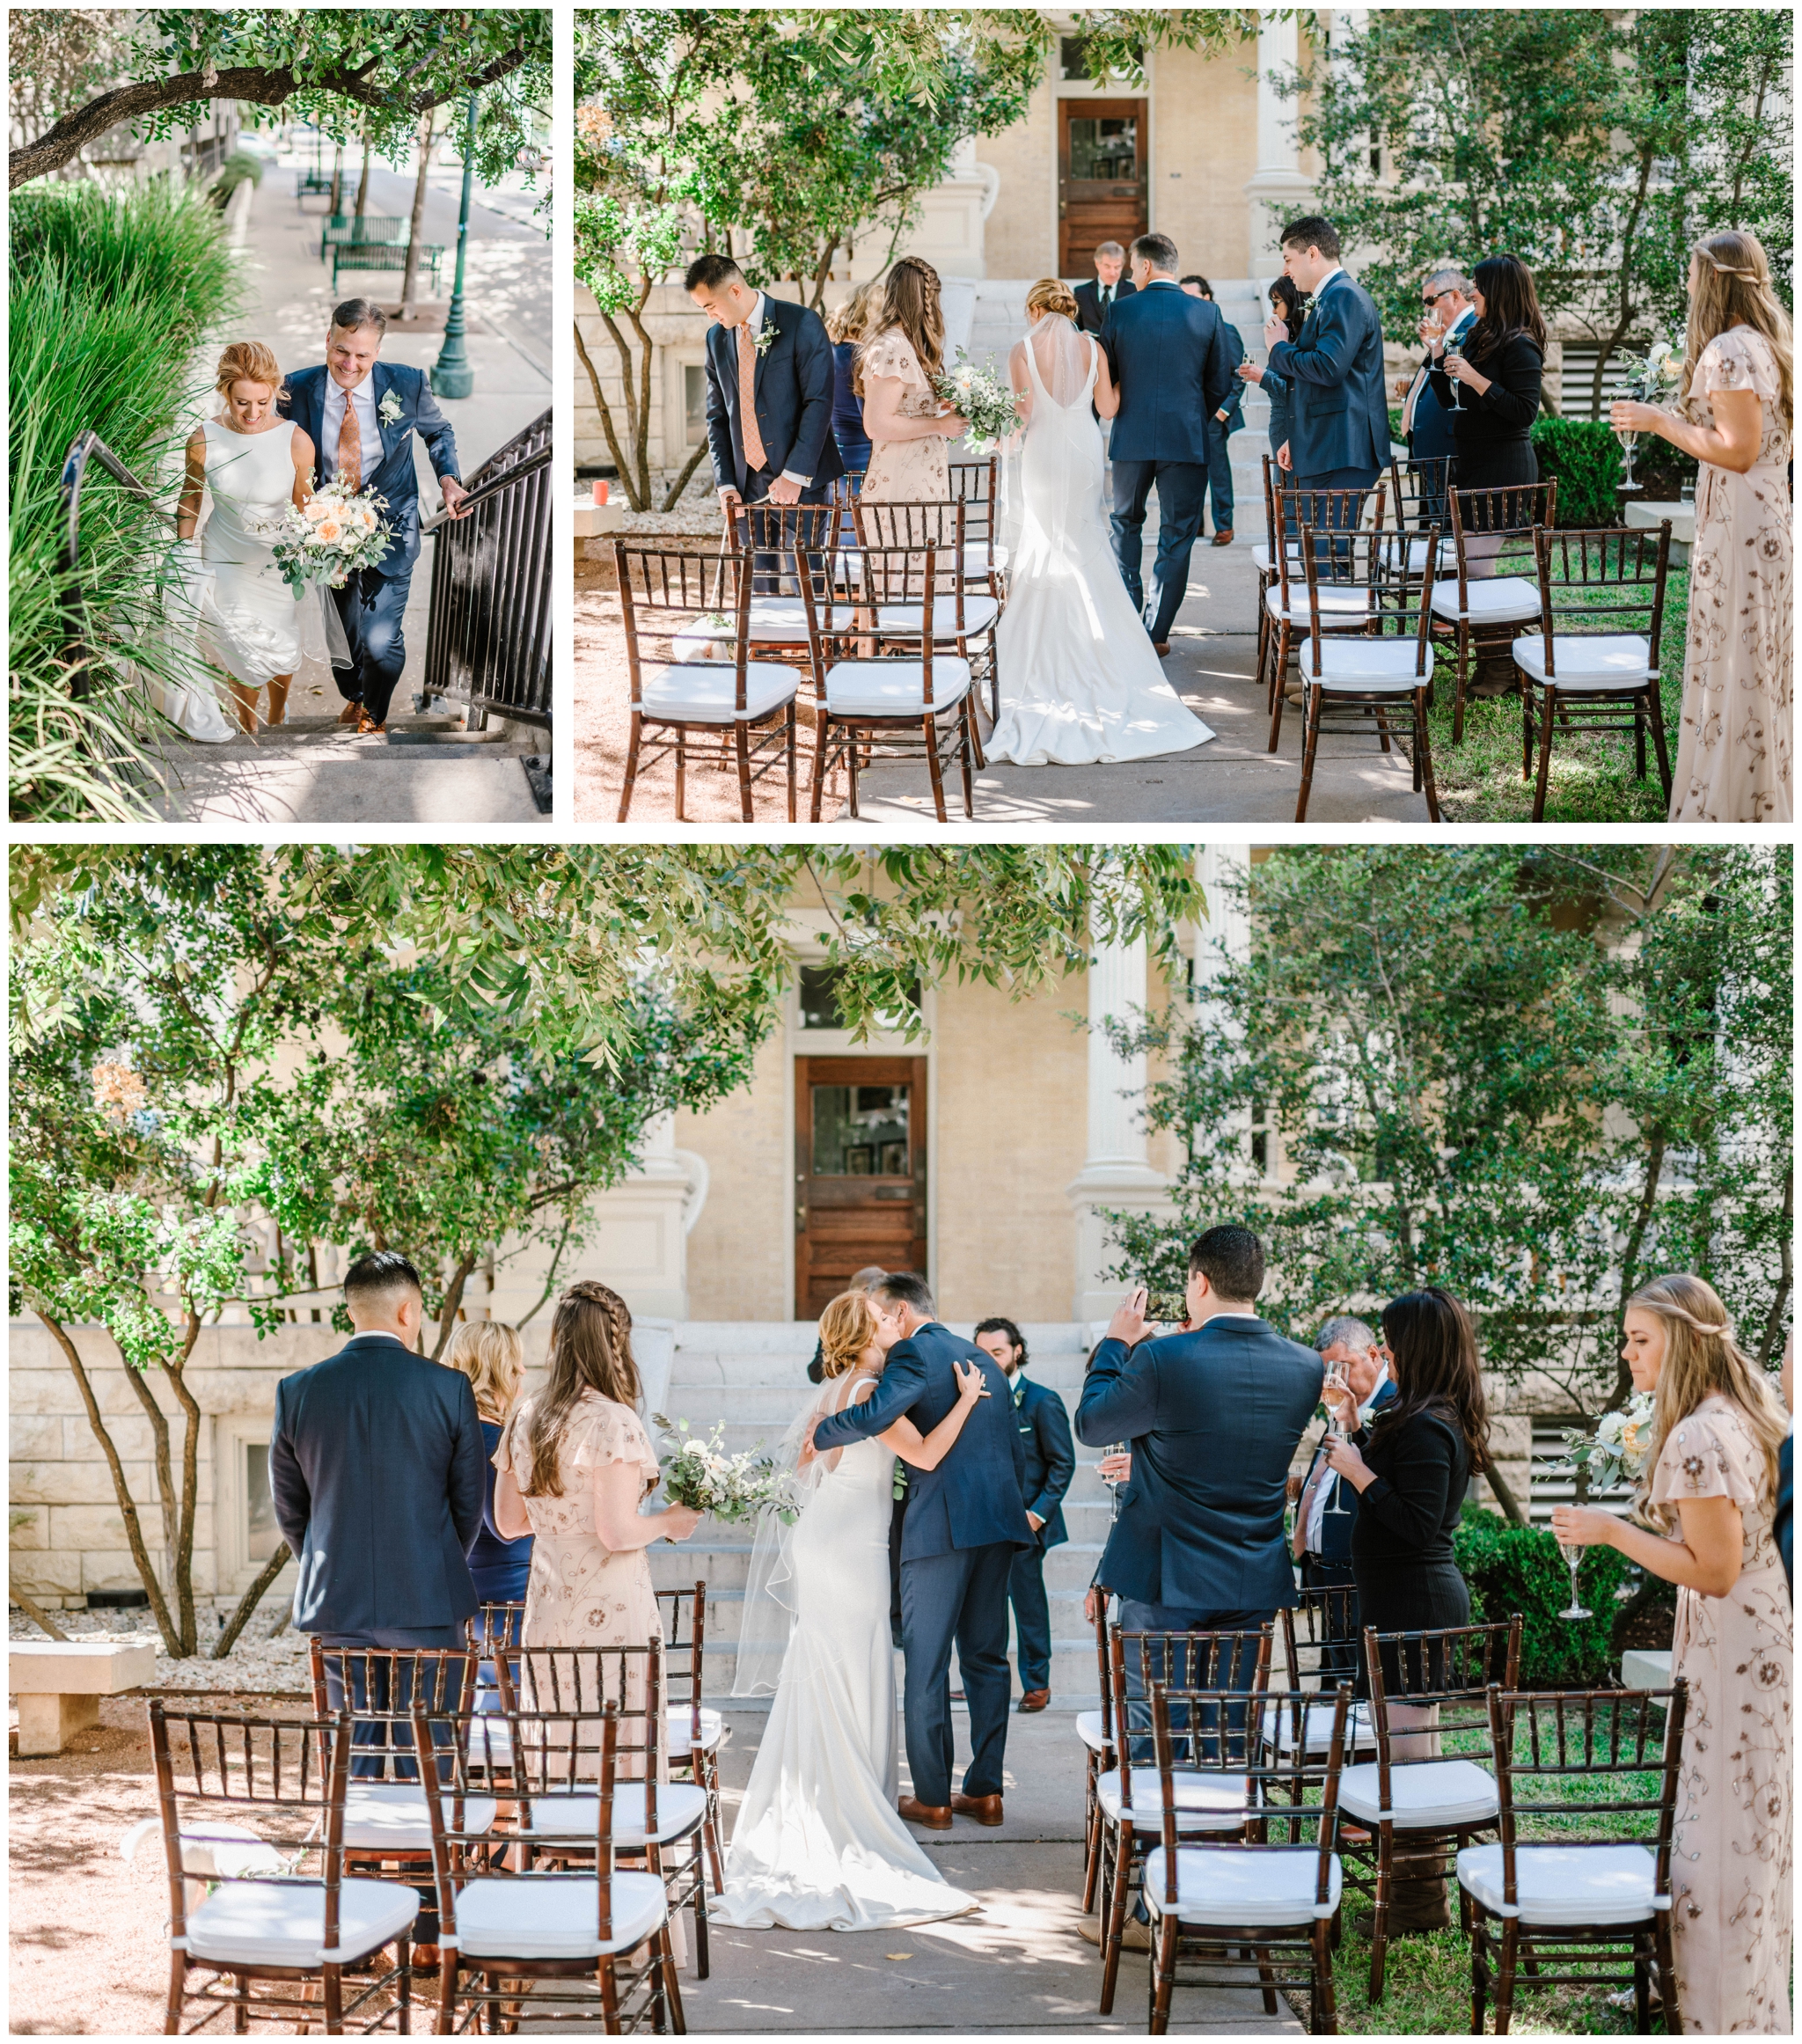 Emily and Ralph’s intimate wedding ceremony in Austin, Texas